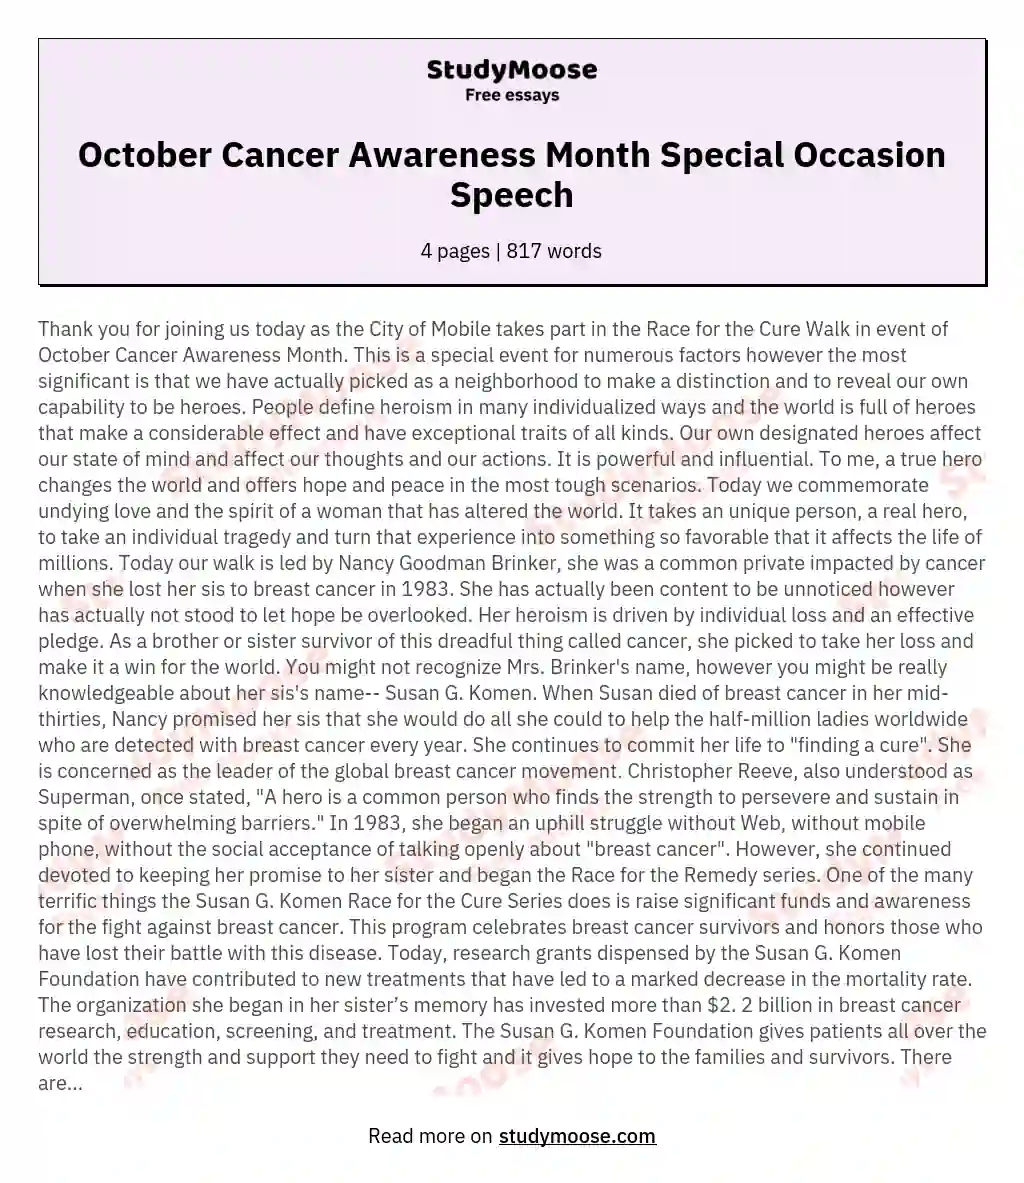 October Cancer Awareness Month Special Occasion Speech